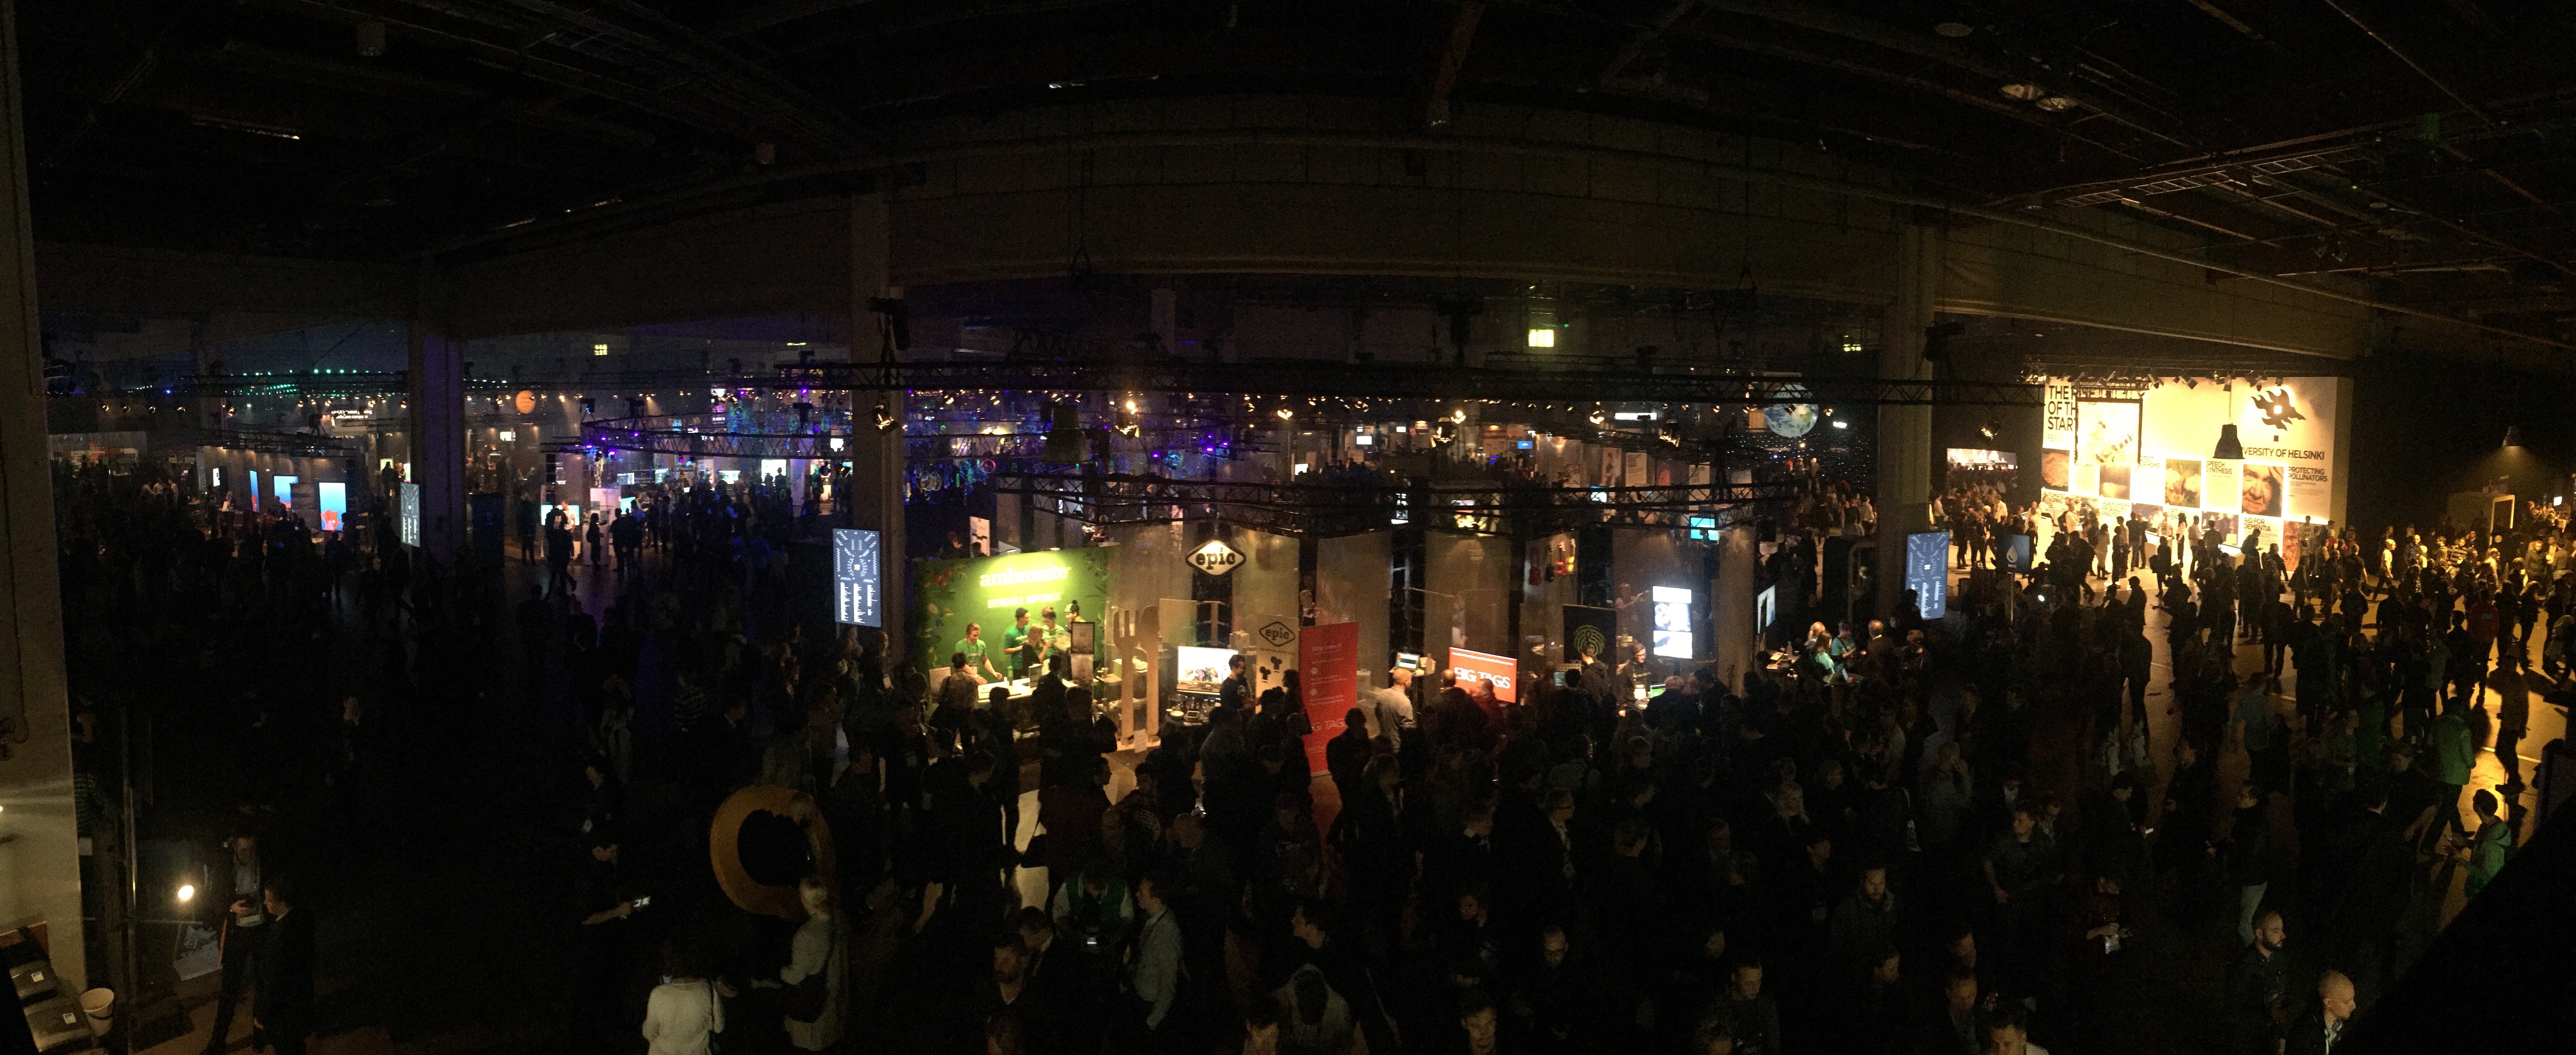 View of attendees at Slush conference